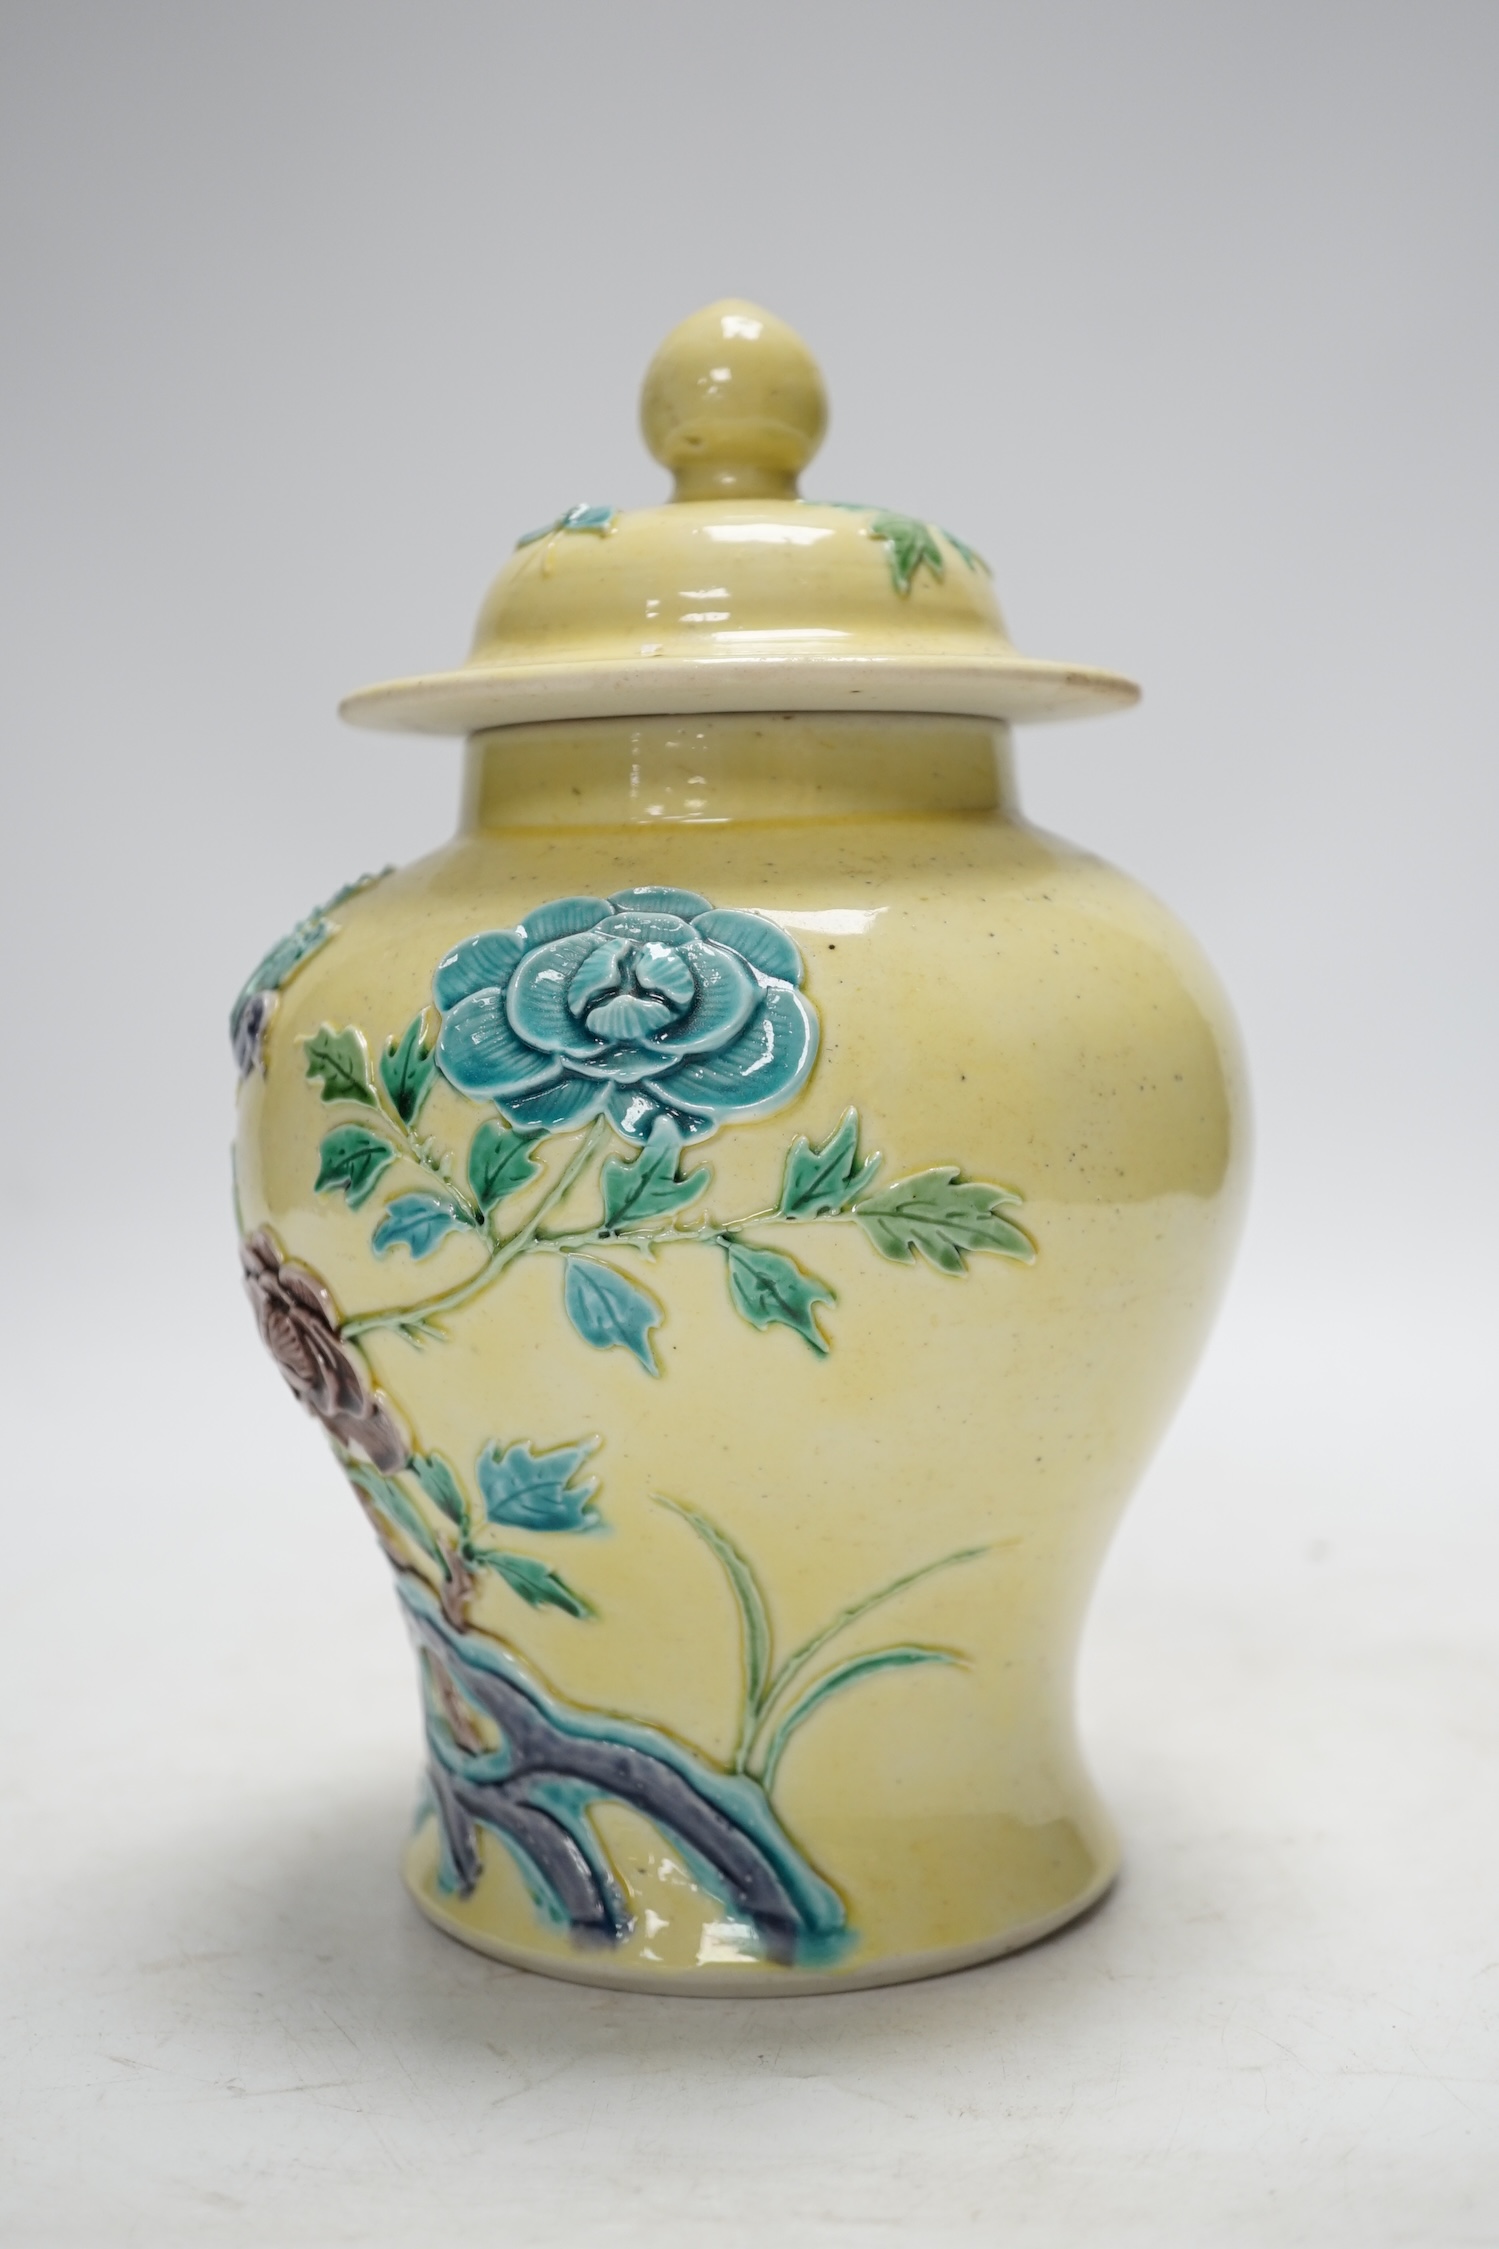 A Chinese yellow glazed vase and cover, early 20th century, 21cm. Condition - good